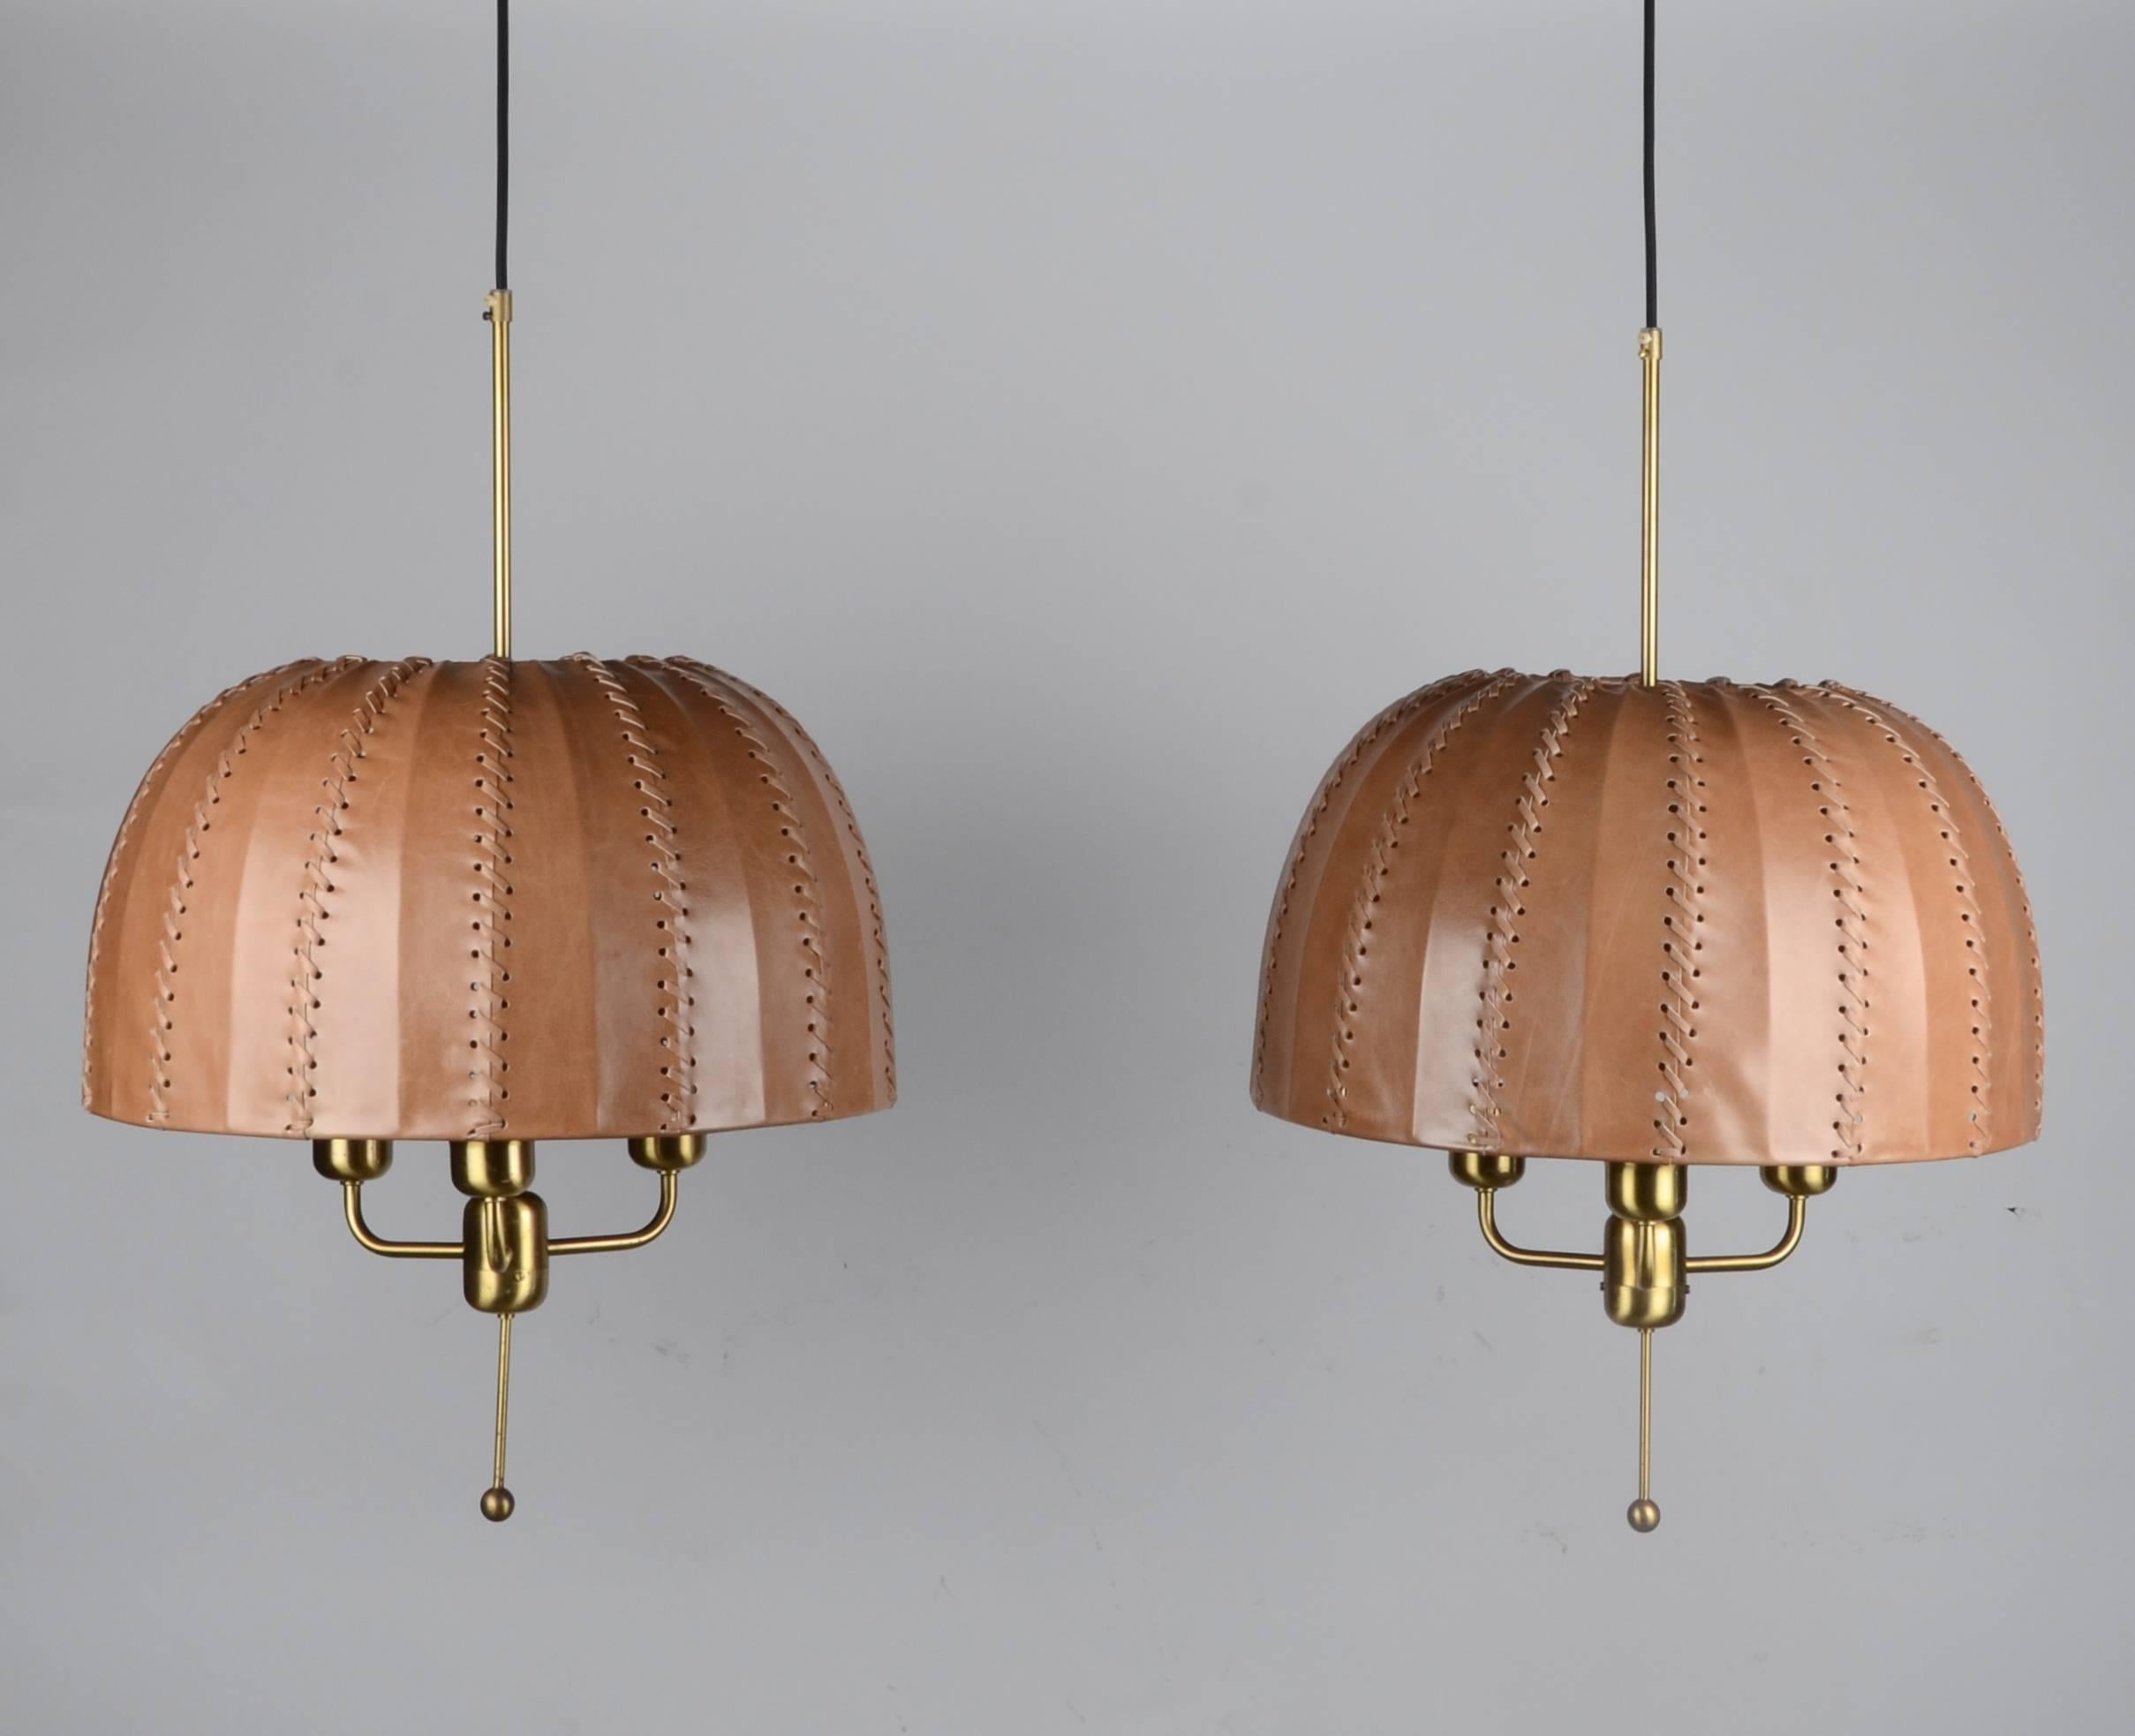 A pair of pendants in brass with leather shades. Designed by Hans-Agne Jakobsson for Markaryd, 1960s-1970s.